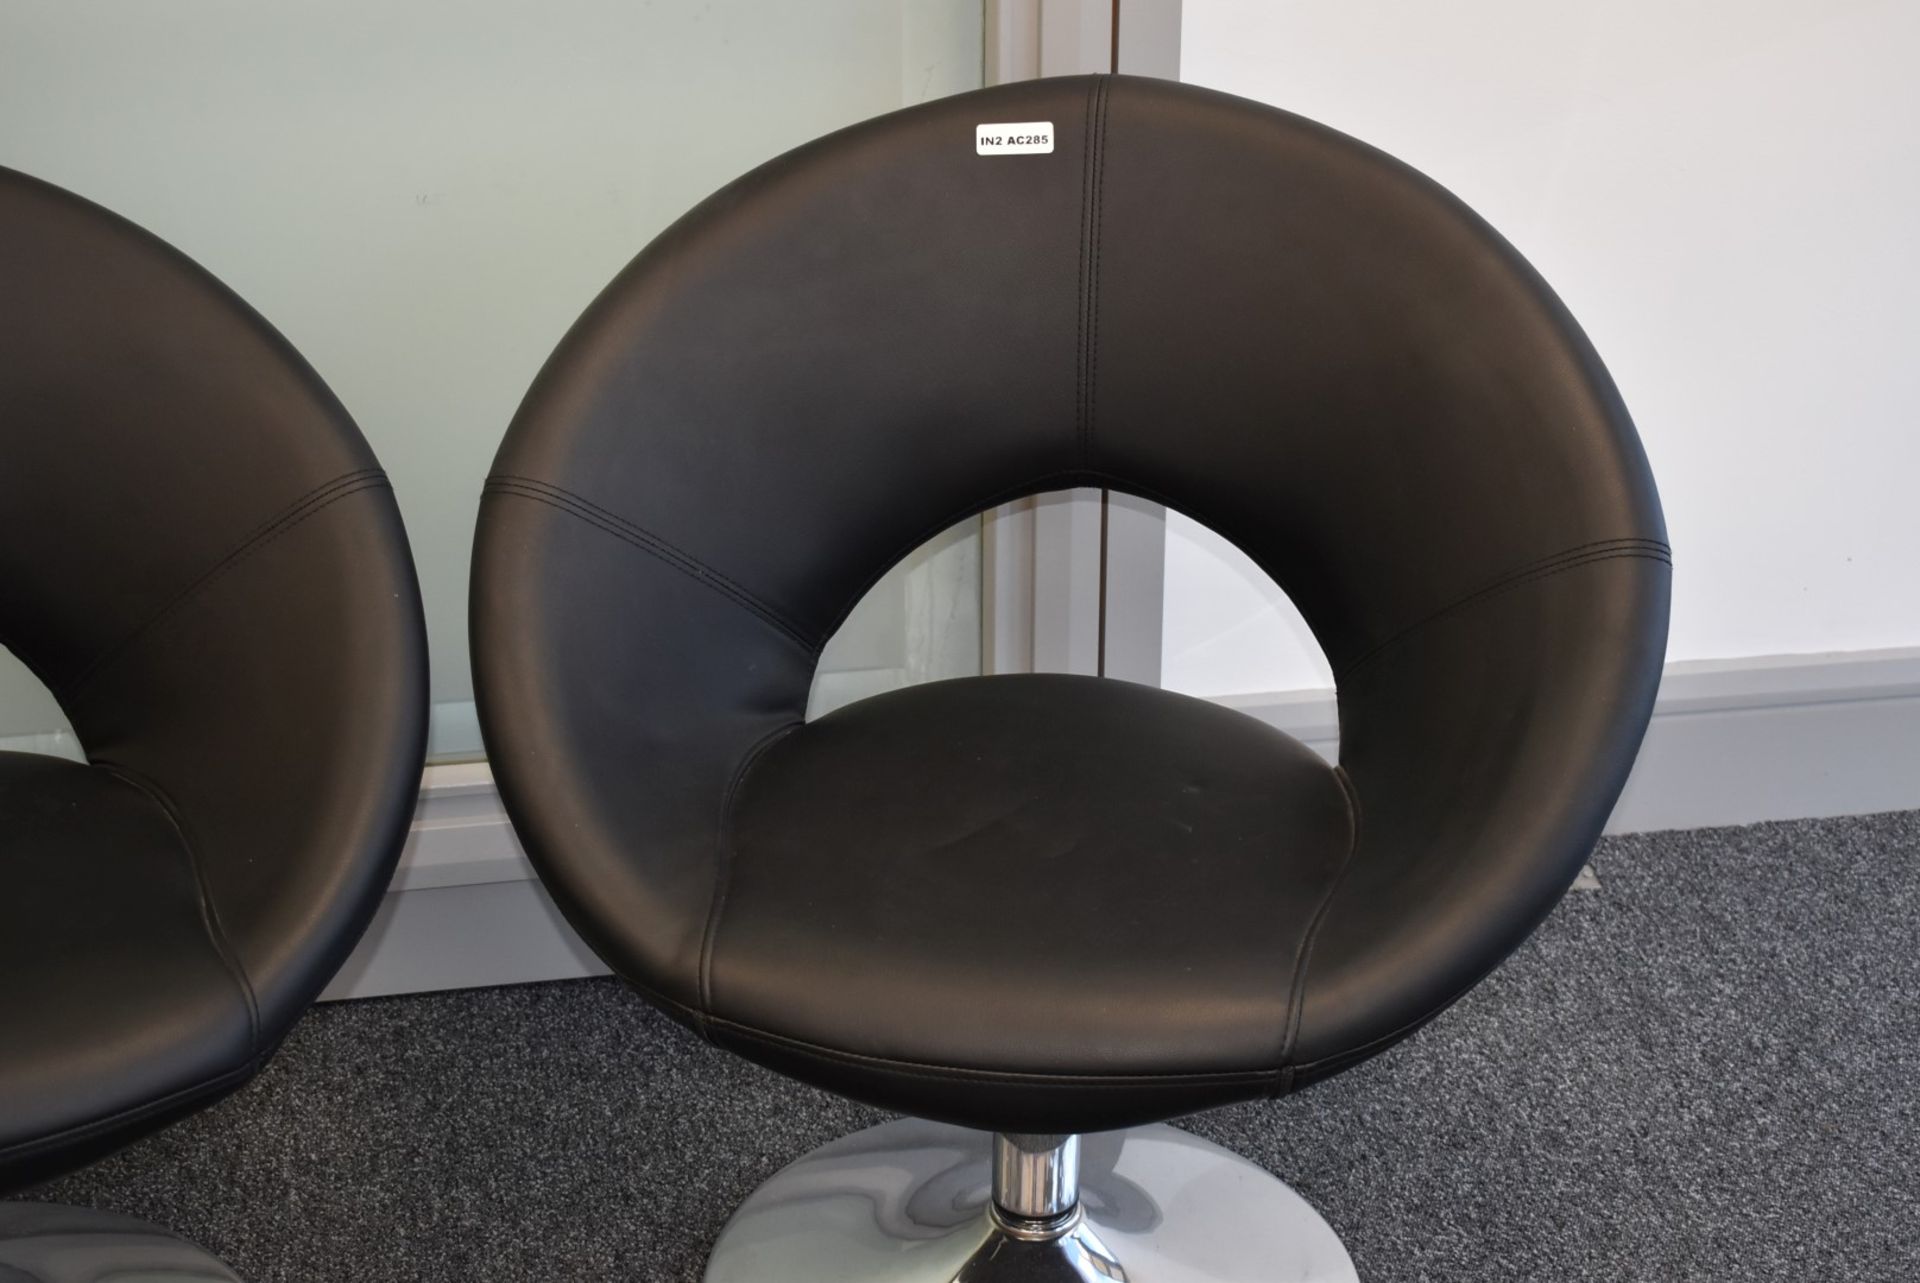 1 x Swivel Tub Chair With Black Faux Leather Upholstery and Chrome Base - 75 cms Wide